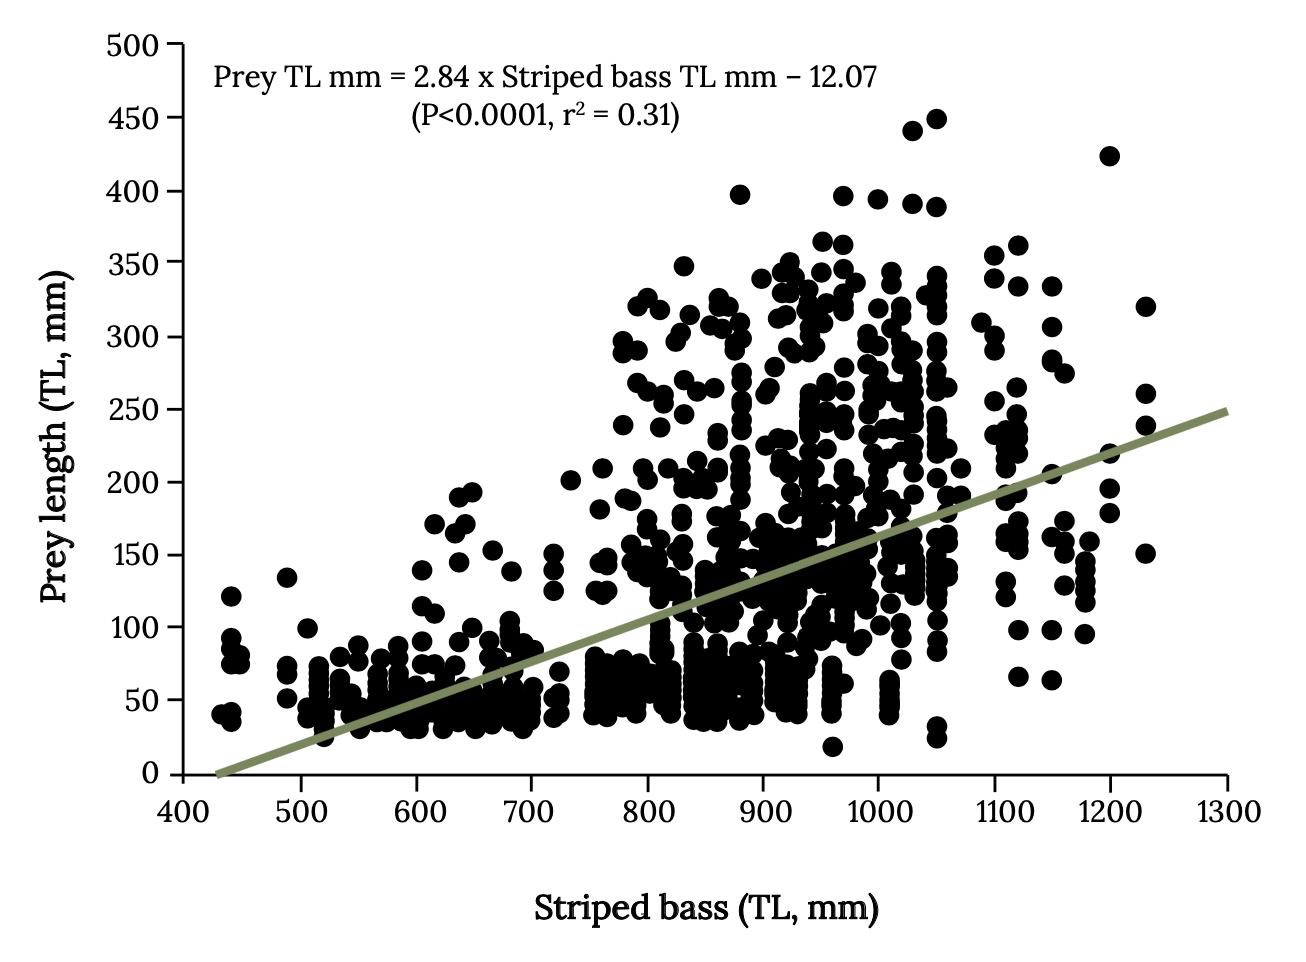 Dot graph shows size of striped bass increases as prey length increases